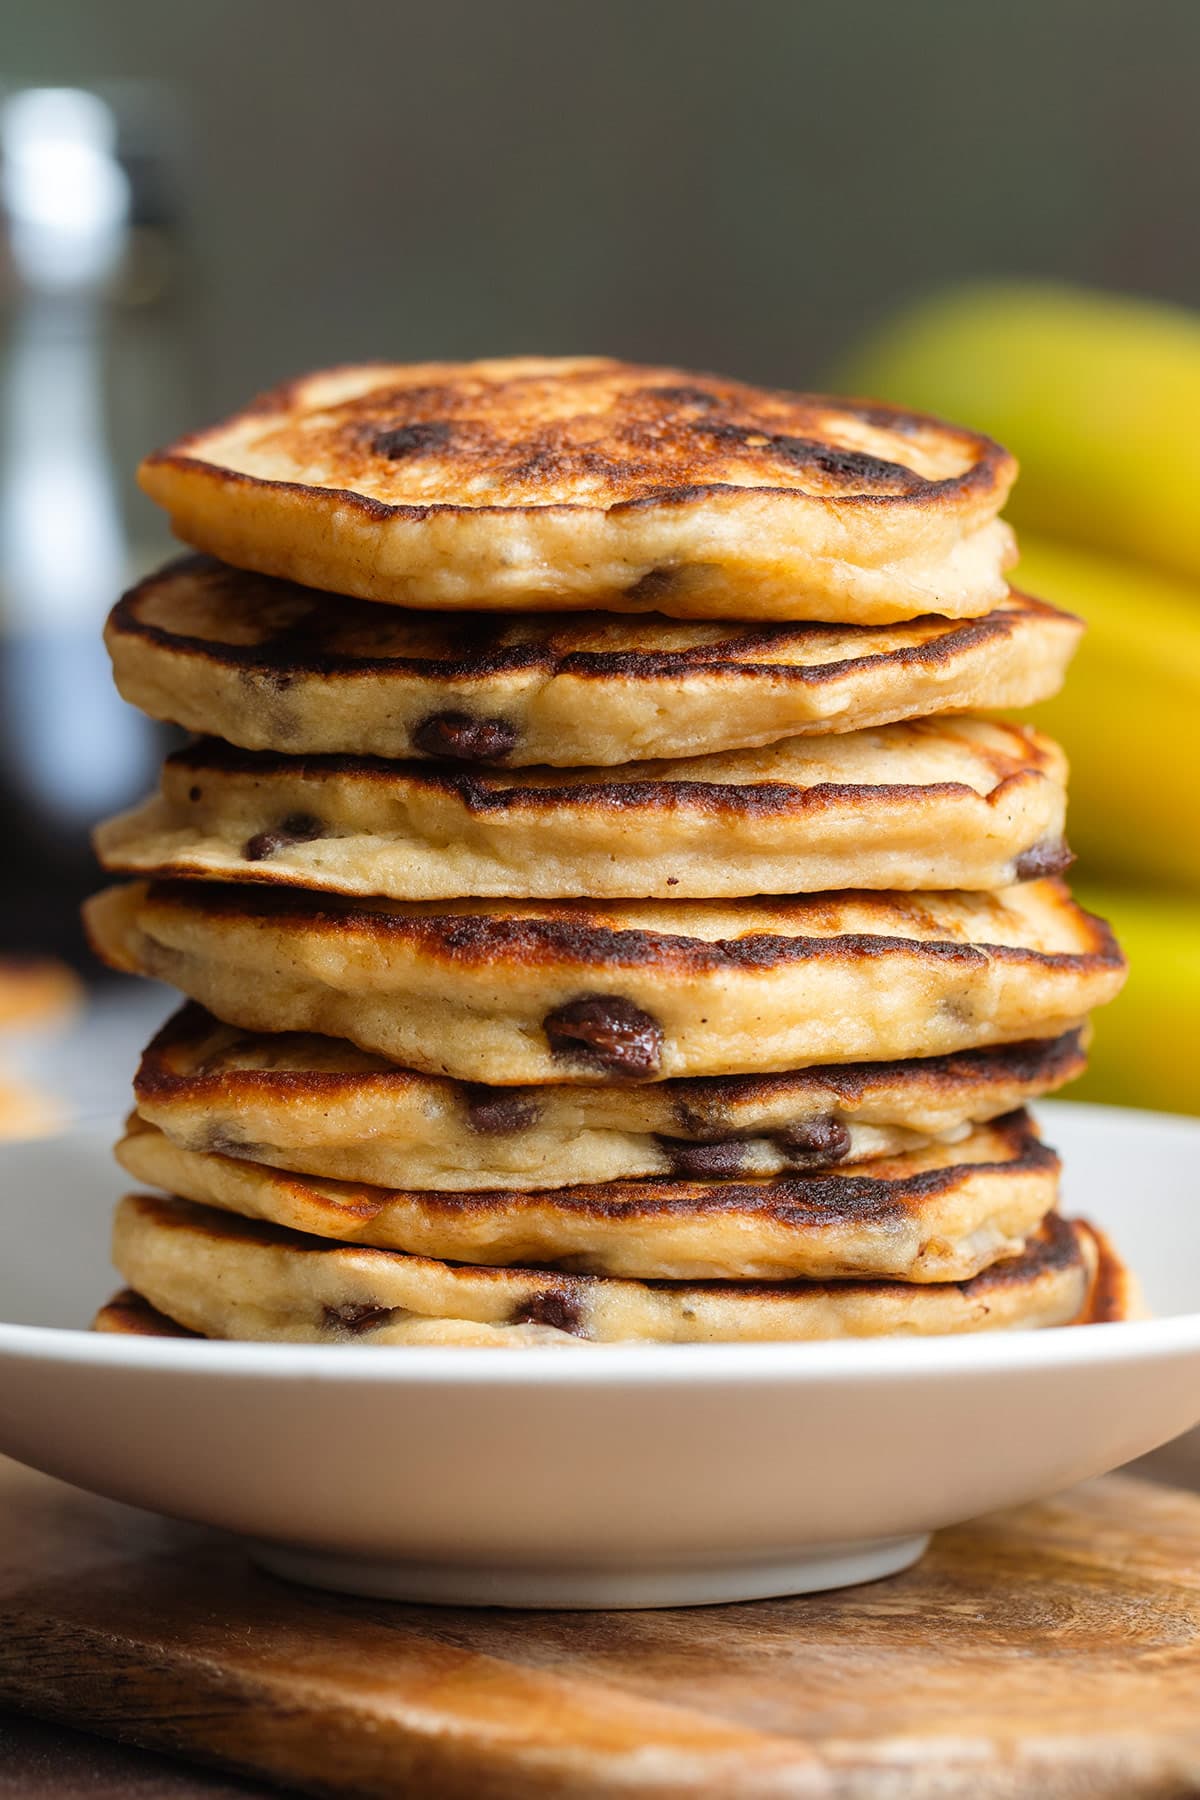 A stack of chocolate chip pancakes on a deep small white plate with bananas in the background.